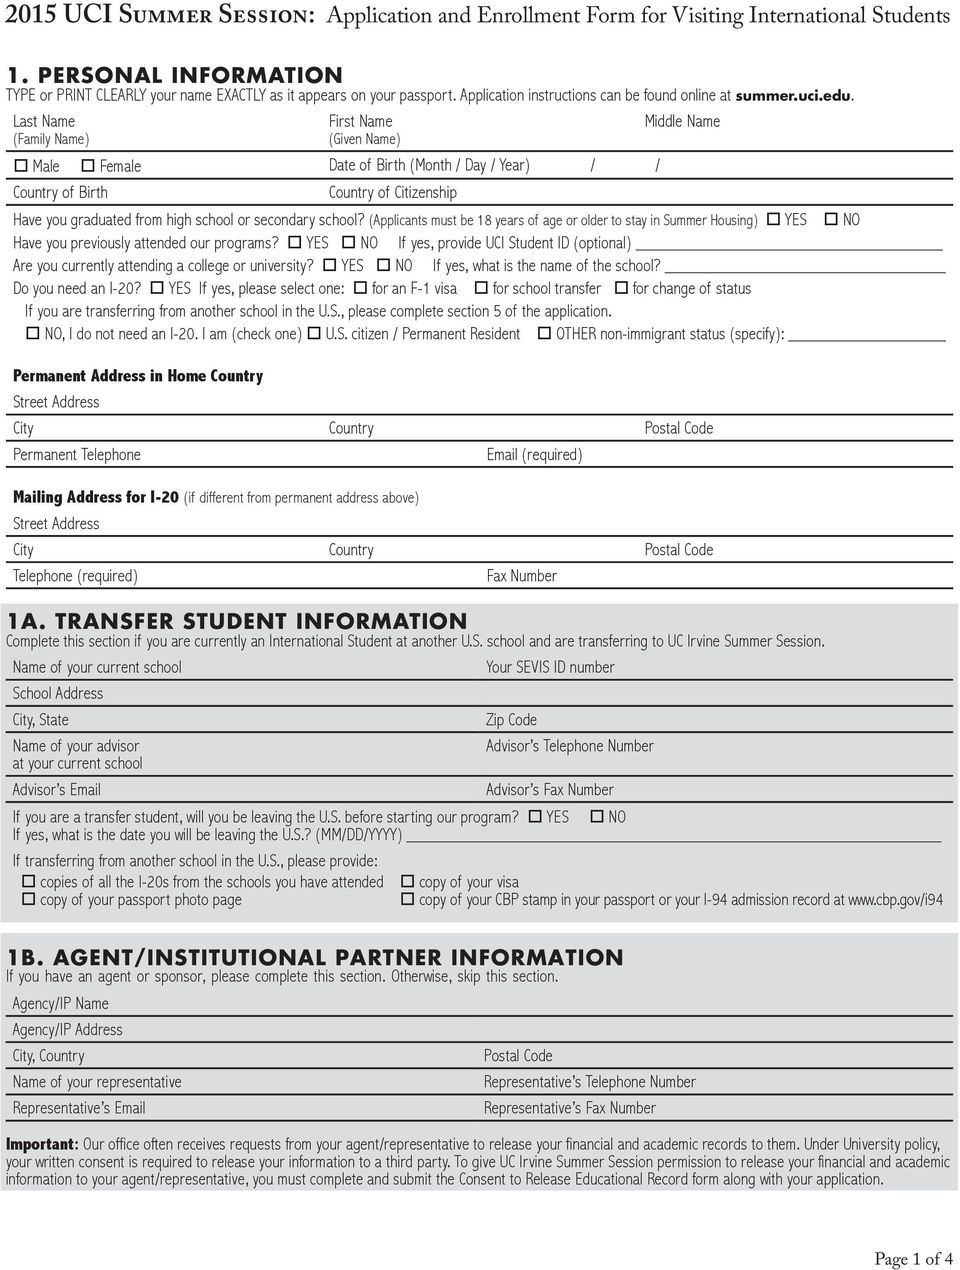 TRANSFER STUDENT INFORMATION Complete this section if you are currently an International Student at another U.S. school and are transferring to.